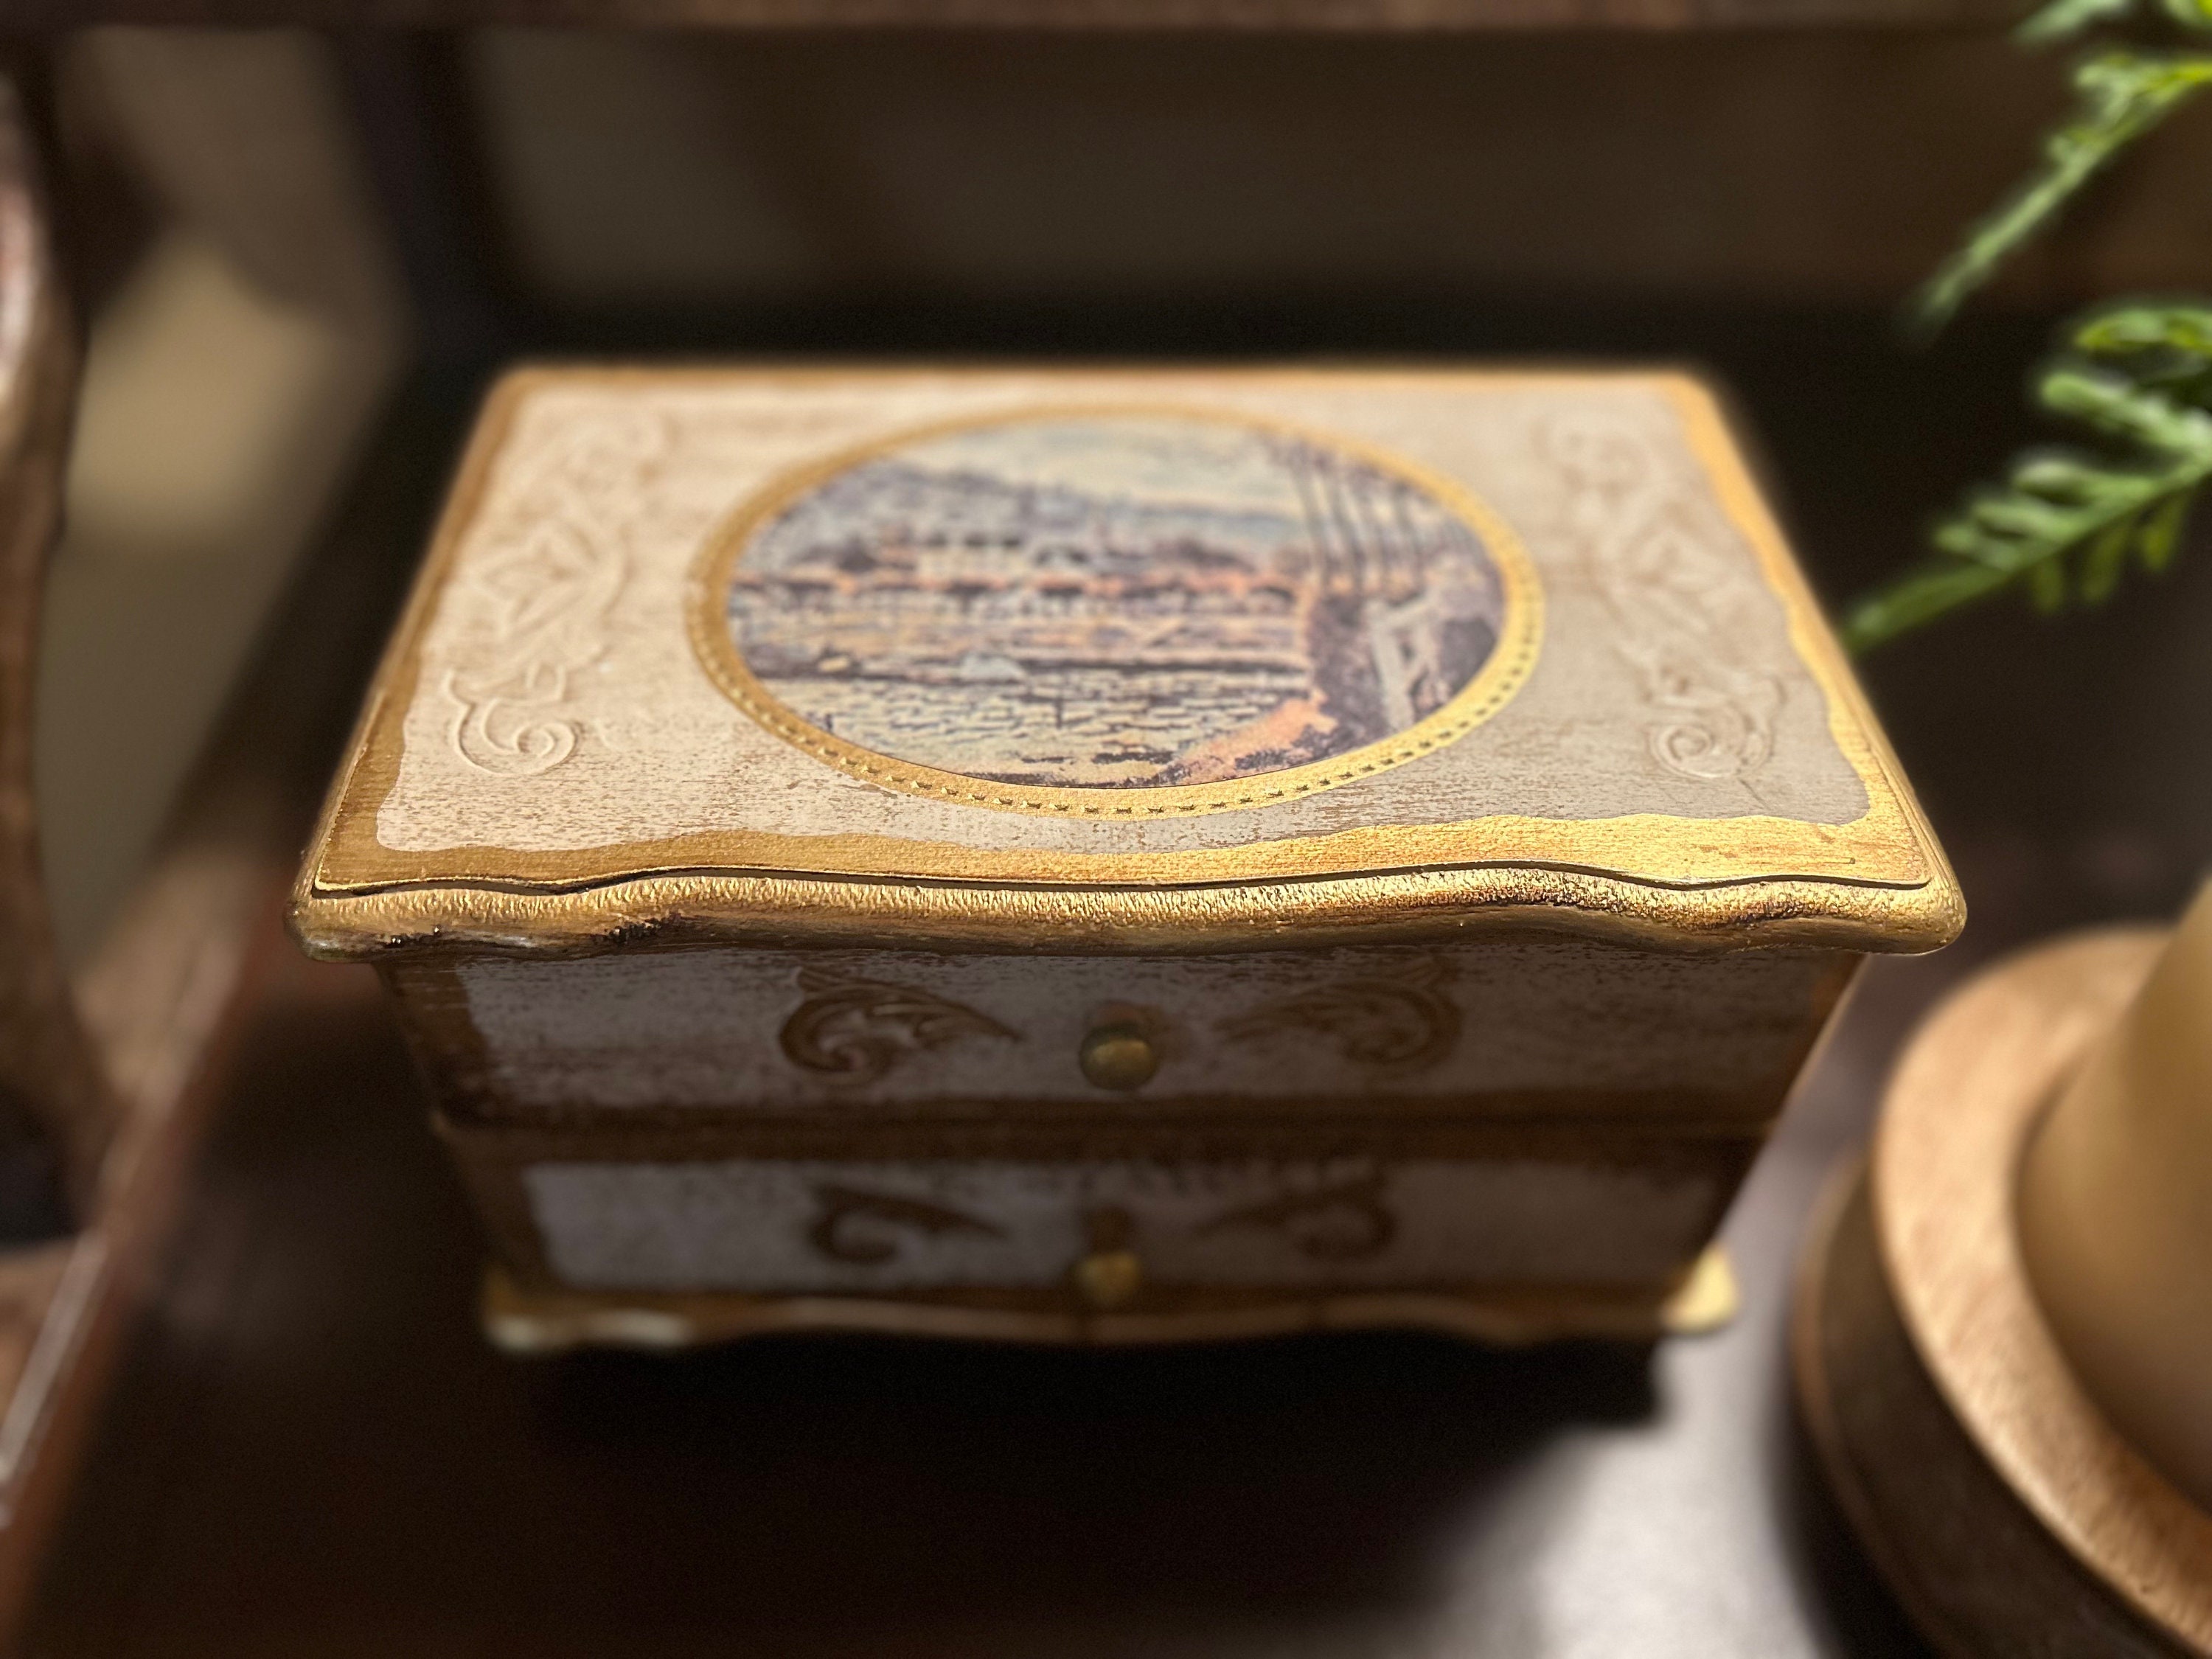 Vintage Florentine Jewelry Box, Gold and White, Wooden – The House of  Hanbury